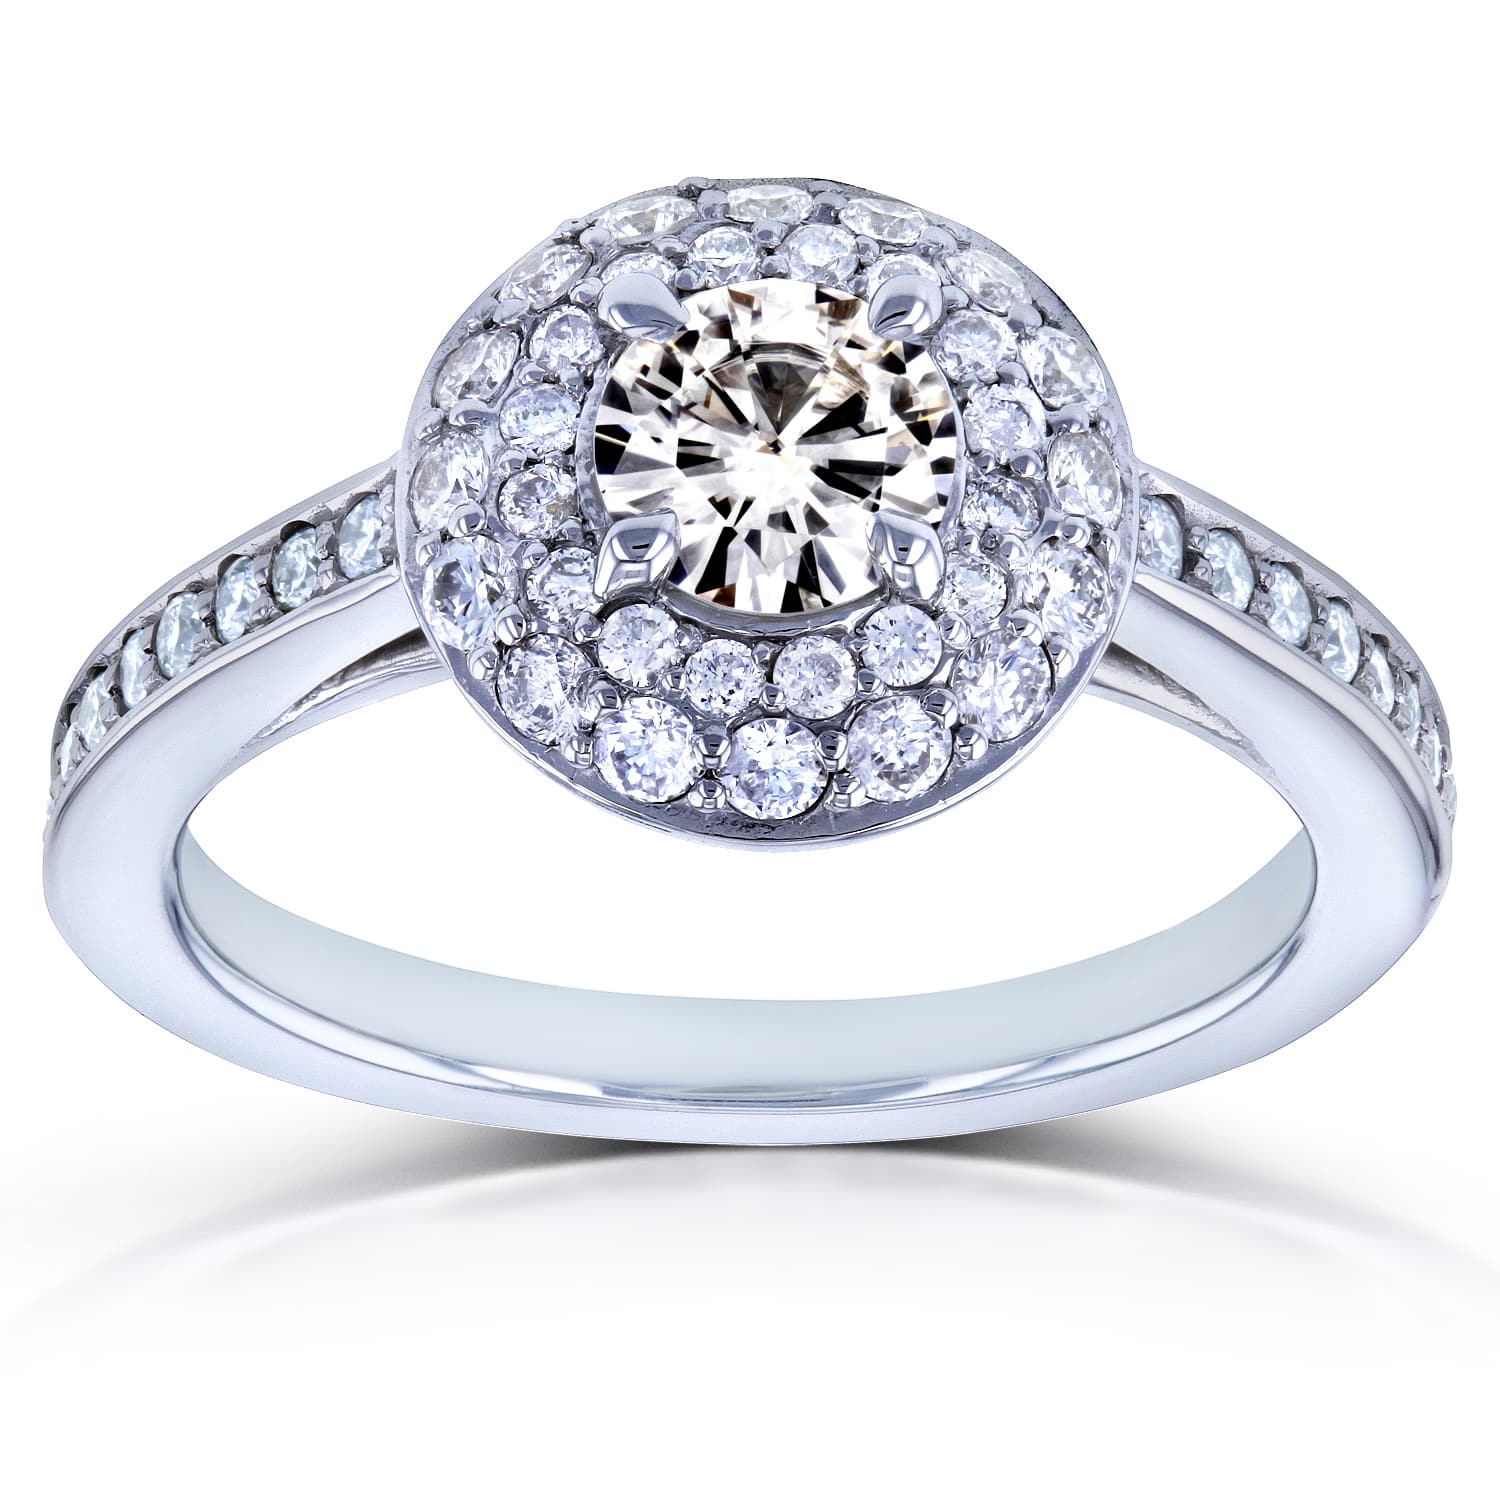 Best Place To Buy A Moissanite Engagement Ring